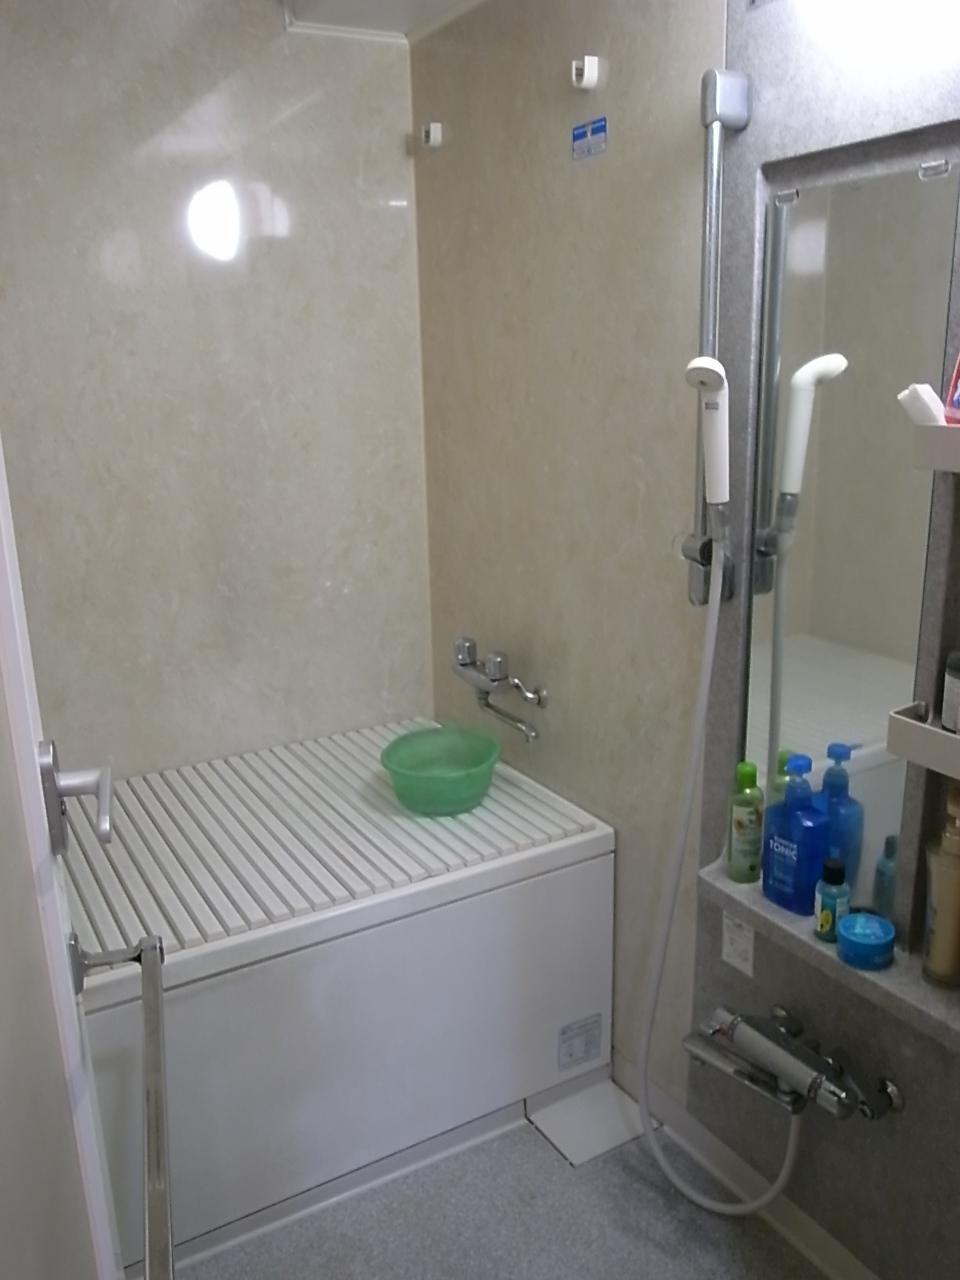 Bathroom. Cold winter is also safe because it also comes with heating function is in the bathroom